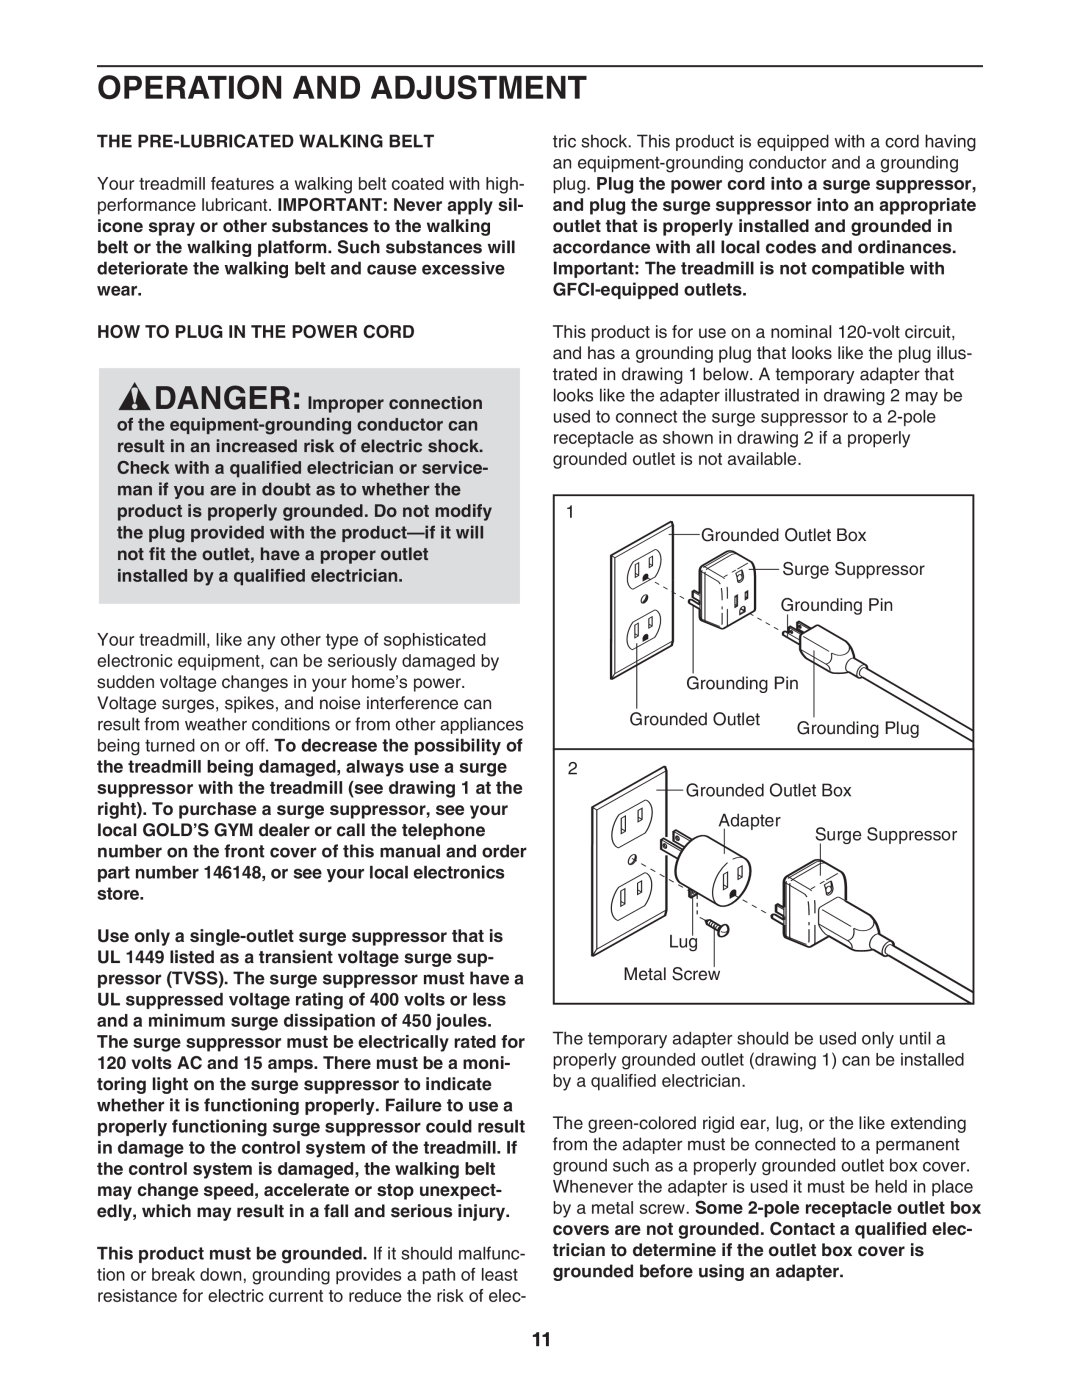 Gold's Gym CWTL05607 manual Operation And Adjustment, The Pre-Lubricated Walking Belt, How To Plug In The Power Cord 